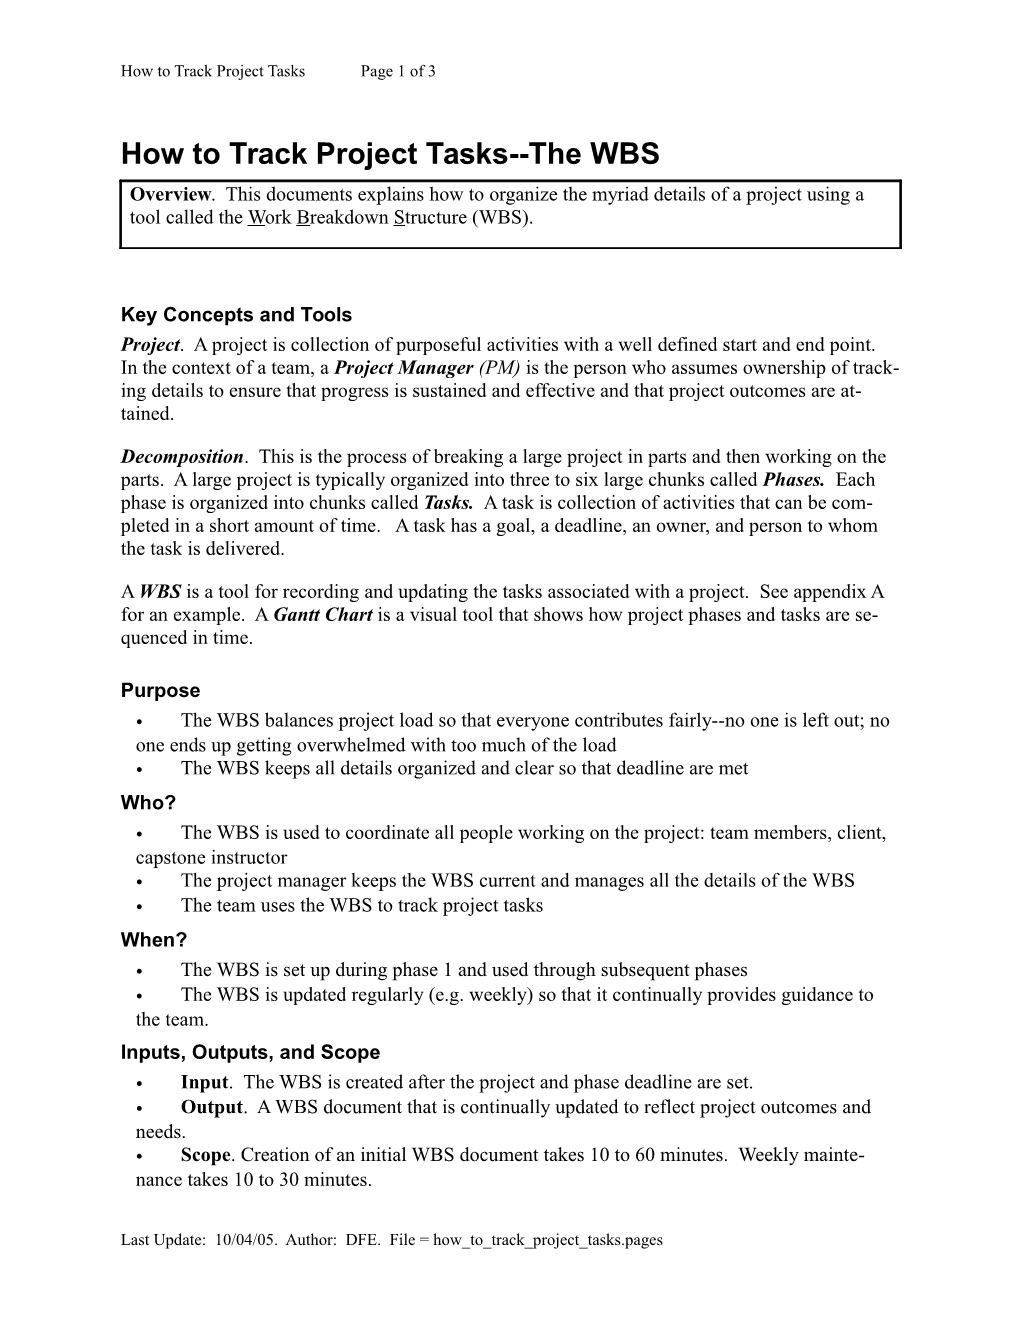 How to Track Project Tasks the WBS